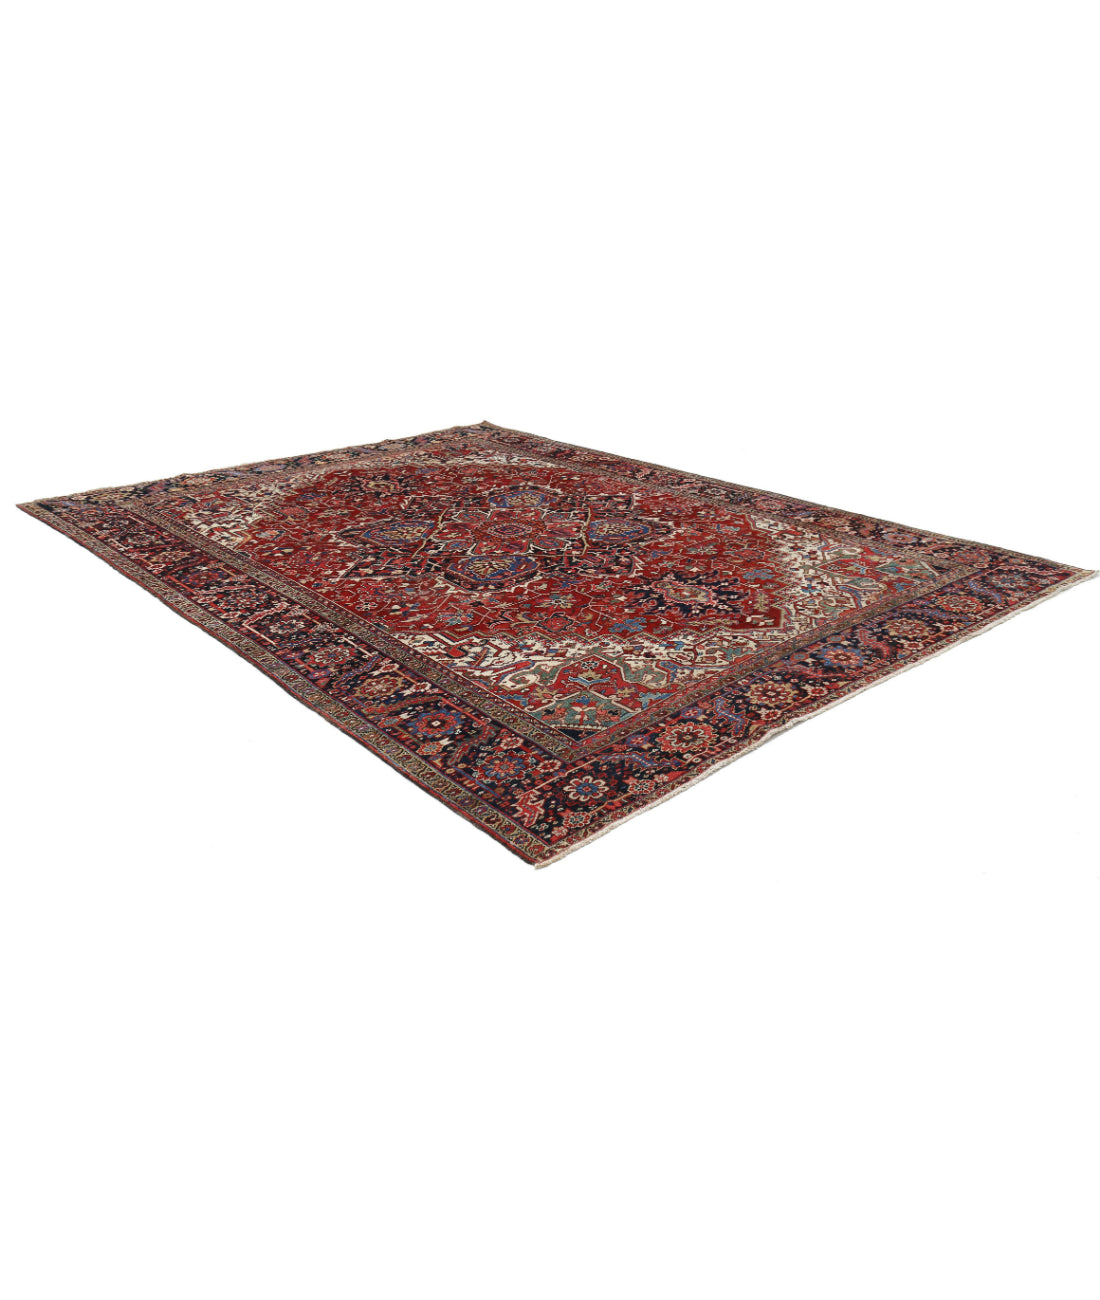 Heriz 10'5'' X 13'8'' Hand-Knotted Wool Rug 10'5'' x 13'8'' (313 X 410) / Red / Blue